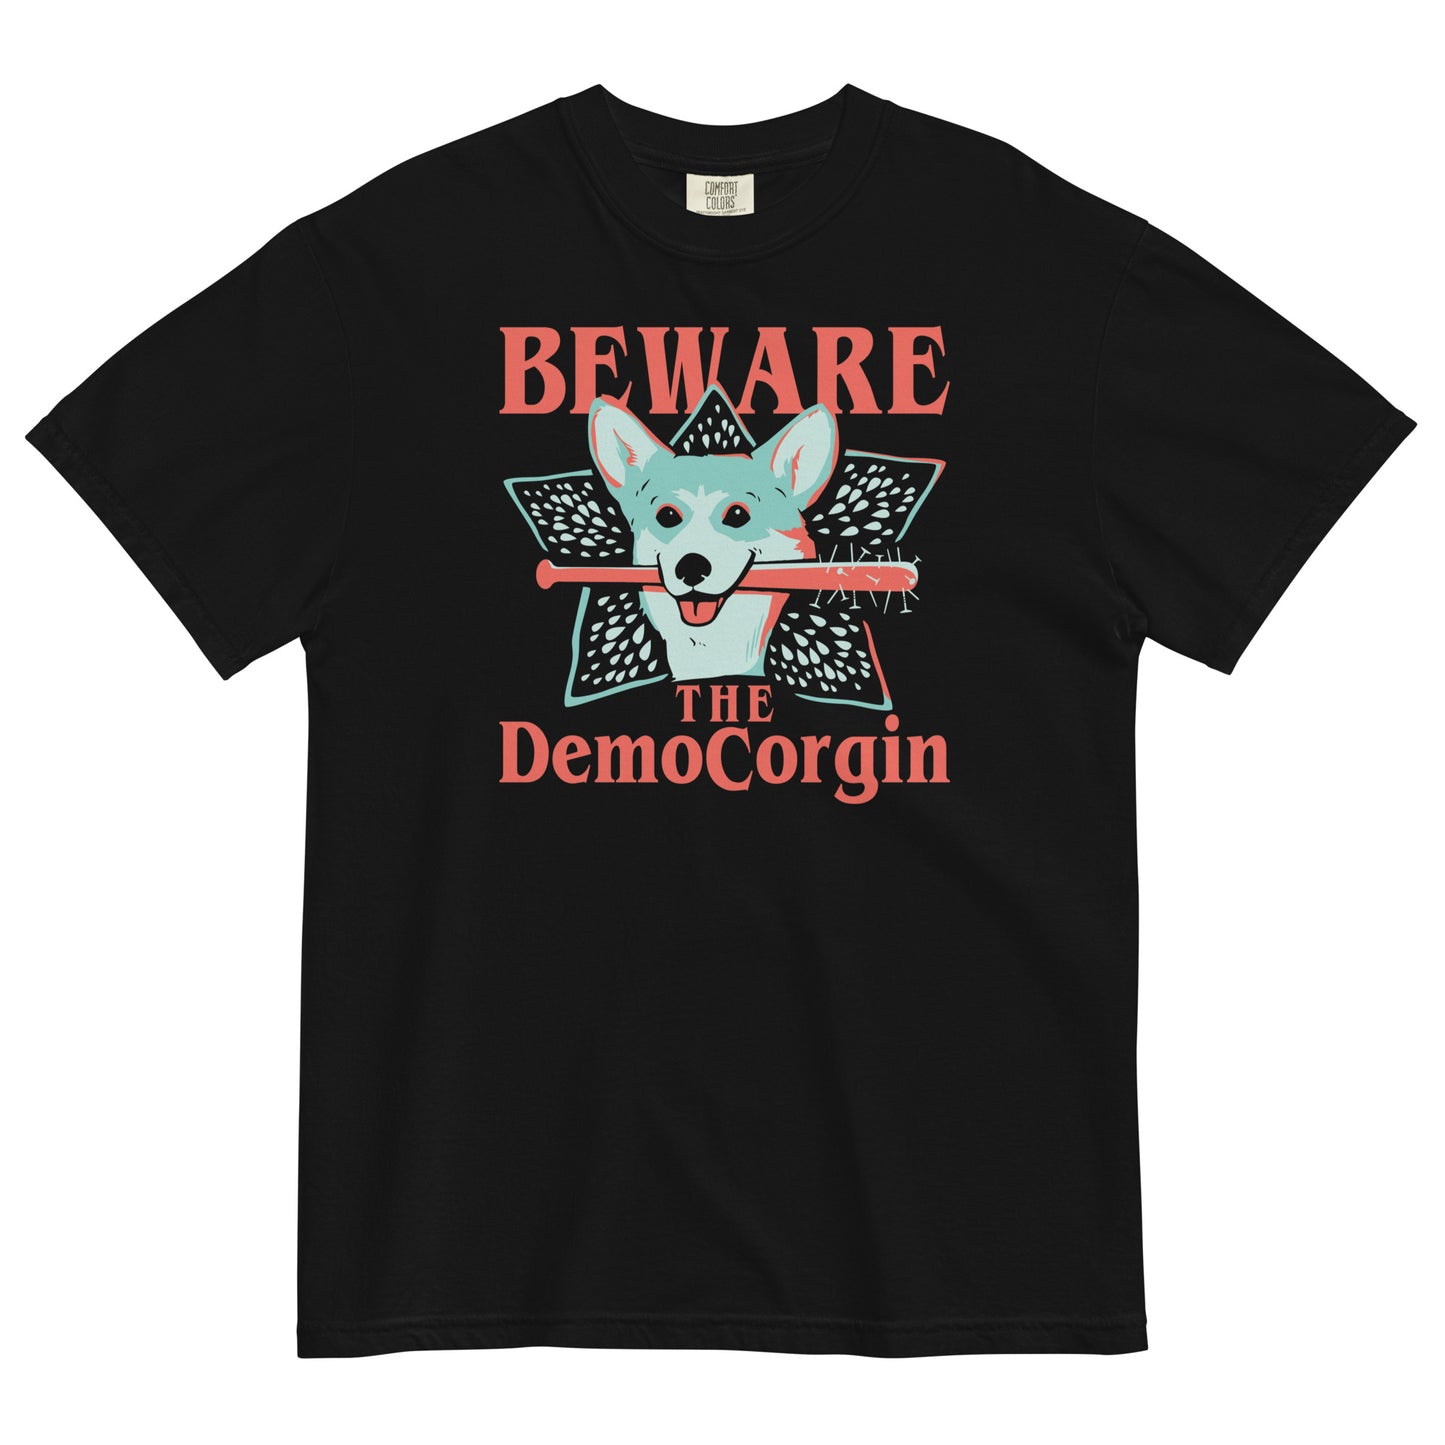 The DemoCorgin Men's Relaxed Fit Tee